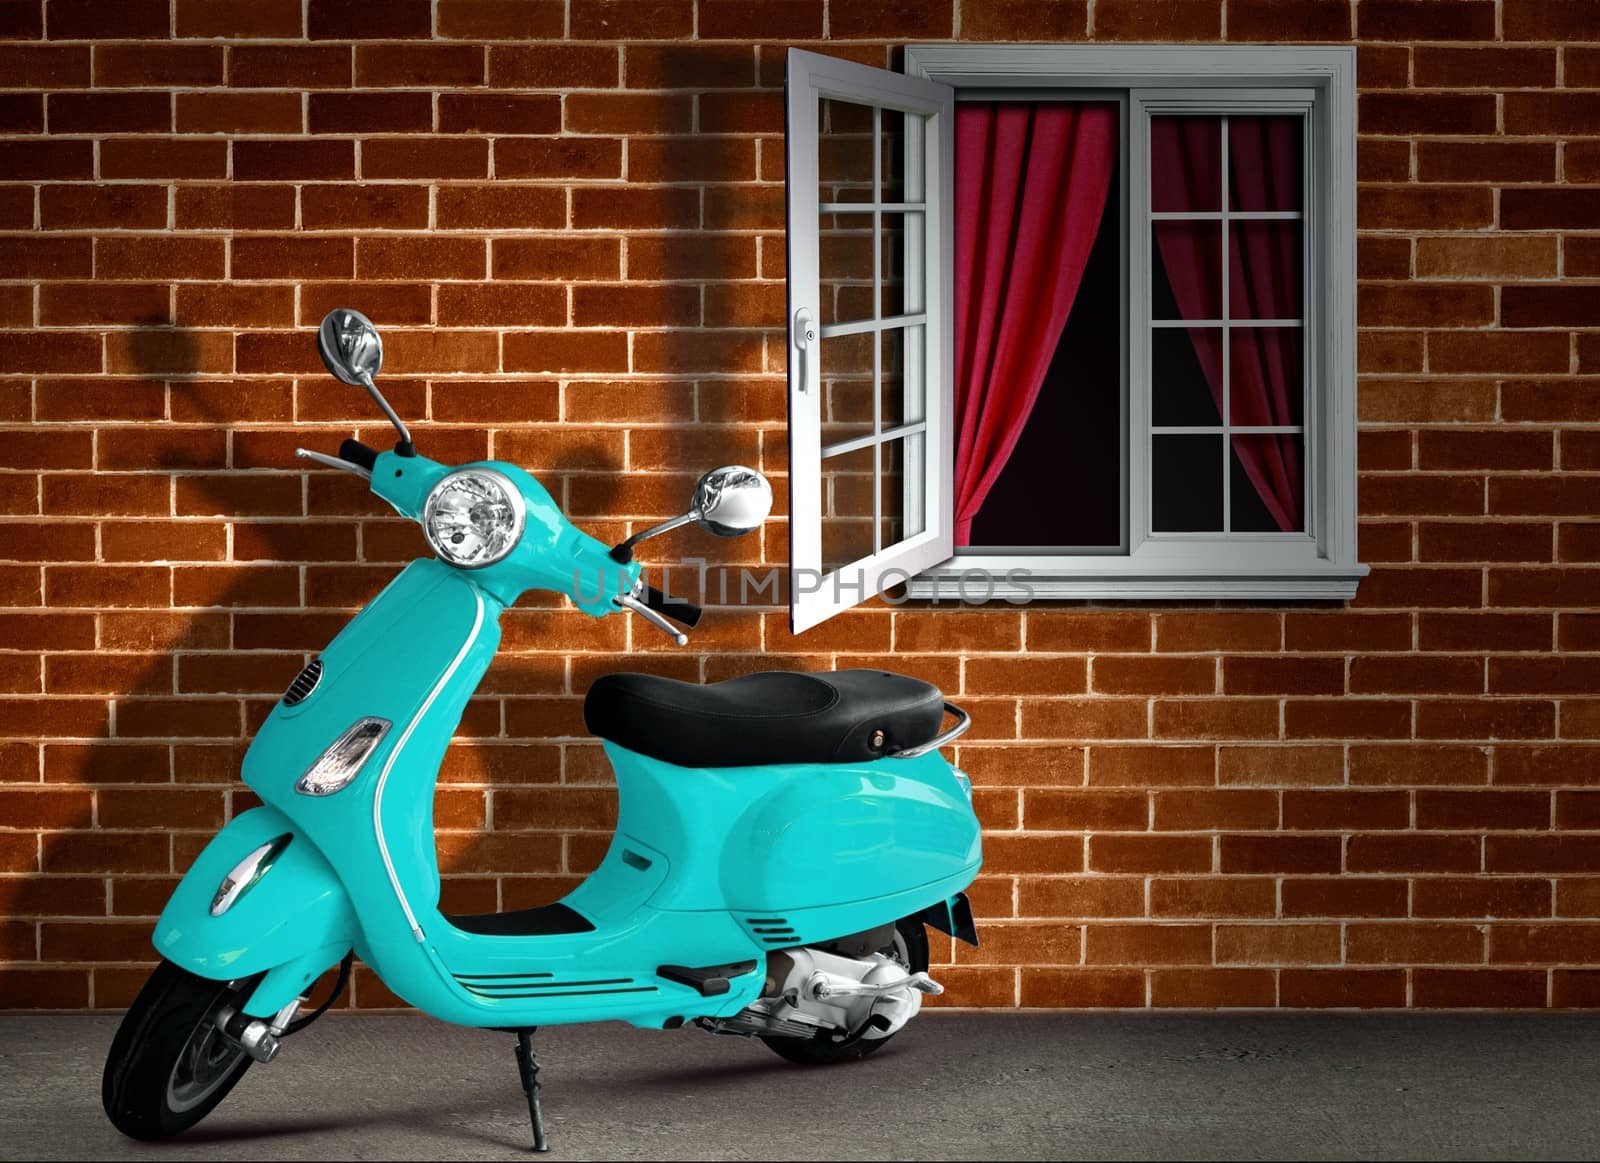 Scooter with Brick Wall Background by razihusin